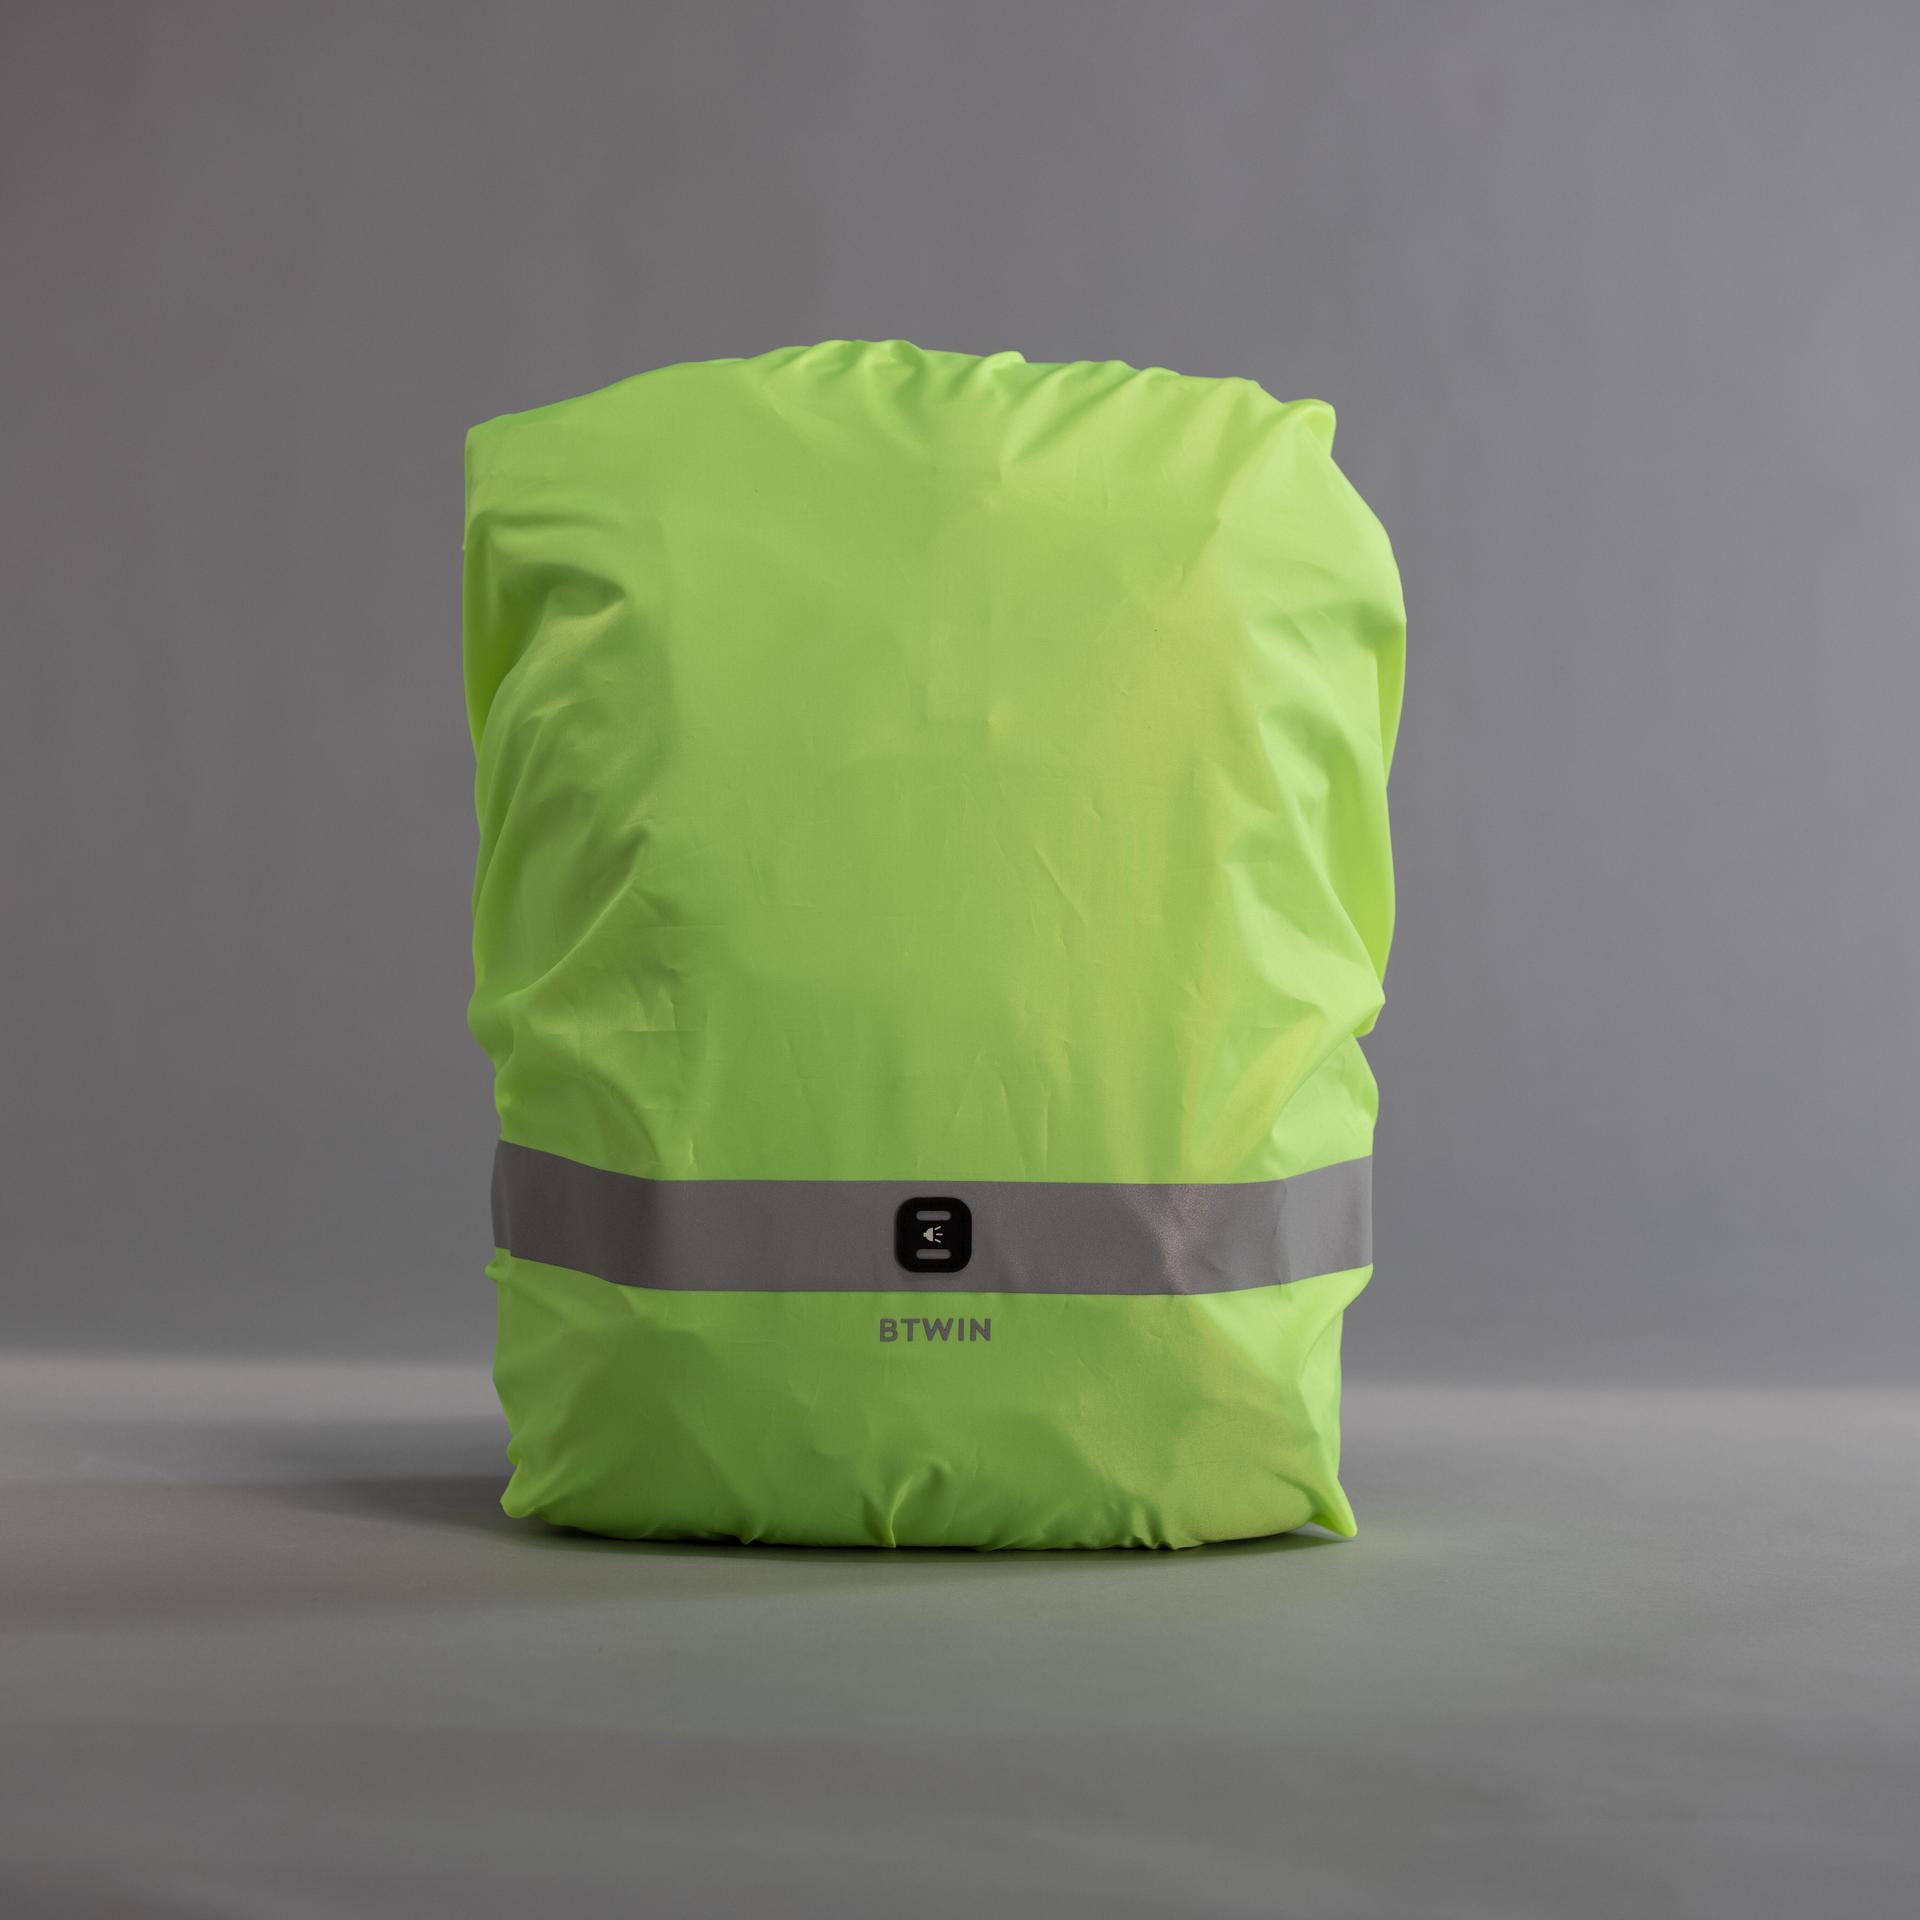 waterproof-day/night-visibility-bag-cover---neon-yellow